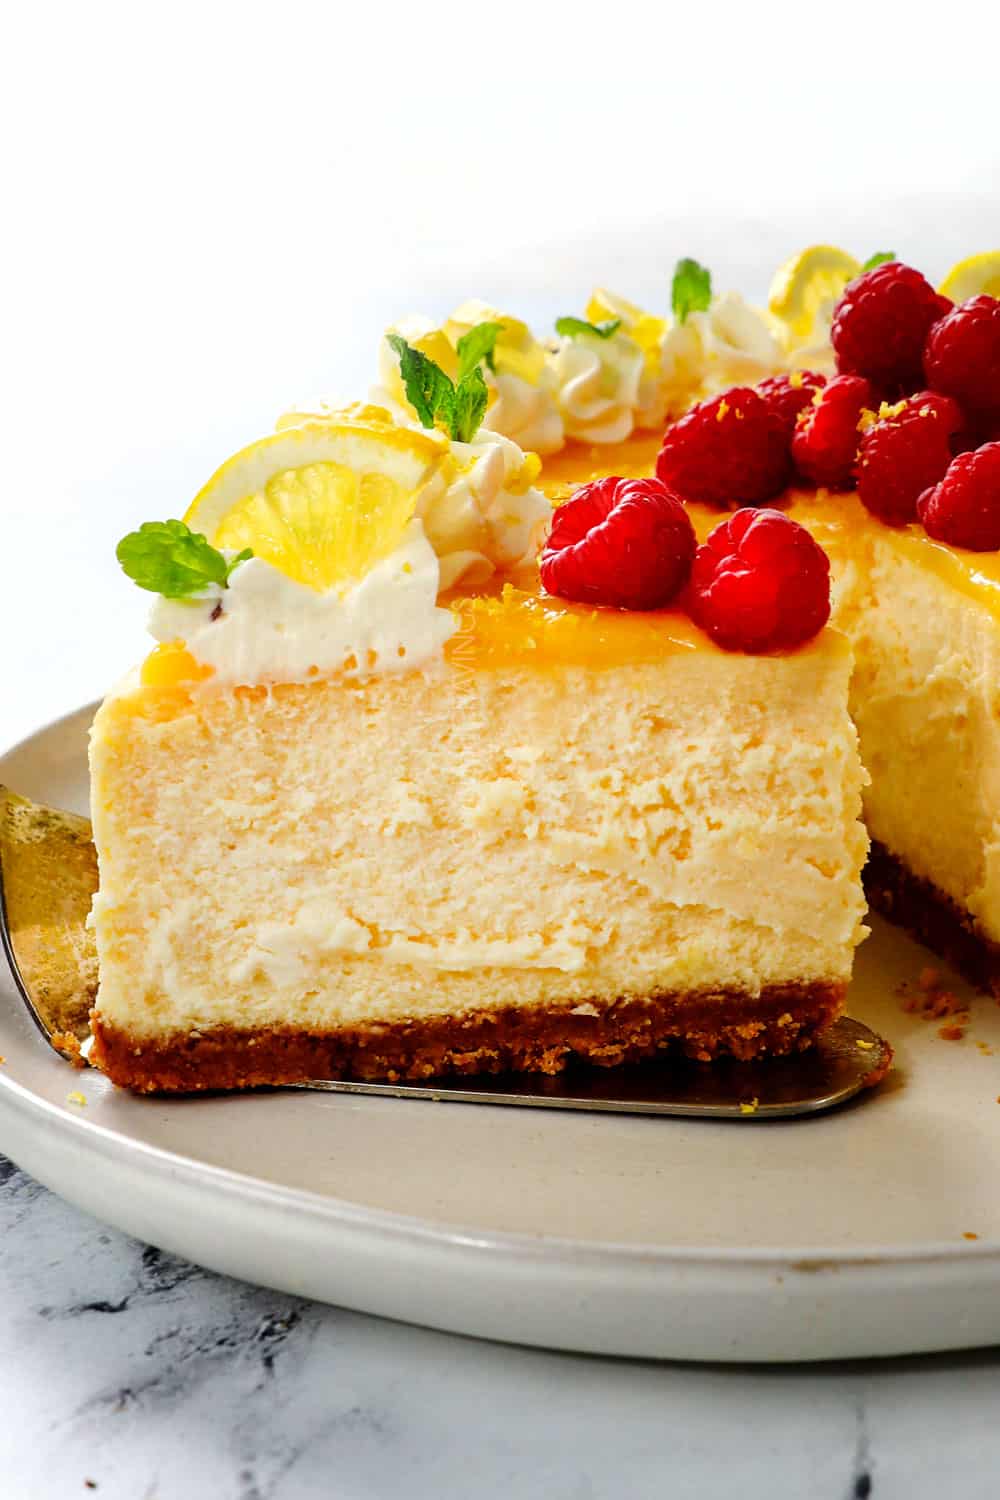 picking up a slice of lemon cheesecake garnished with raspberries